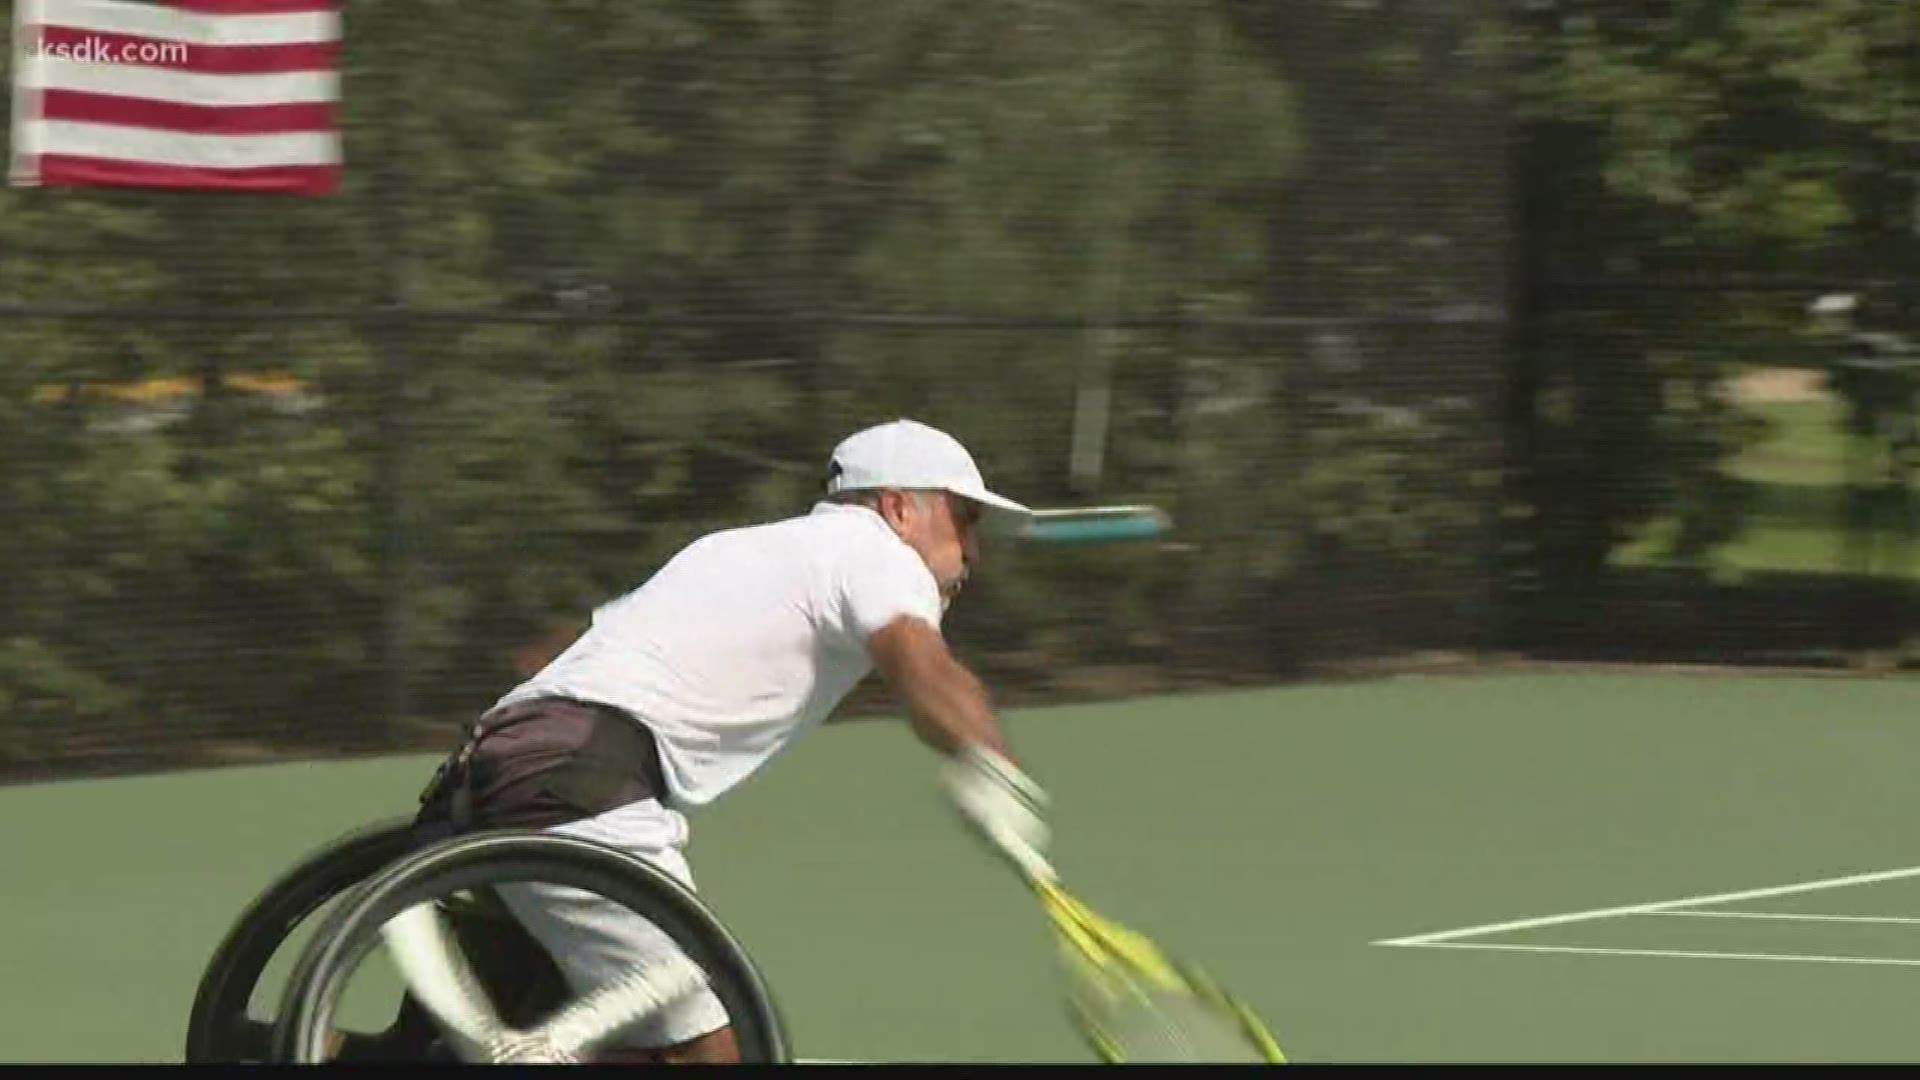 This week at the Dwight Davis Tennis Center at Forest Park is the USTA U.S. Open Wheelchair Championships.